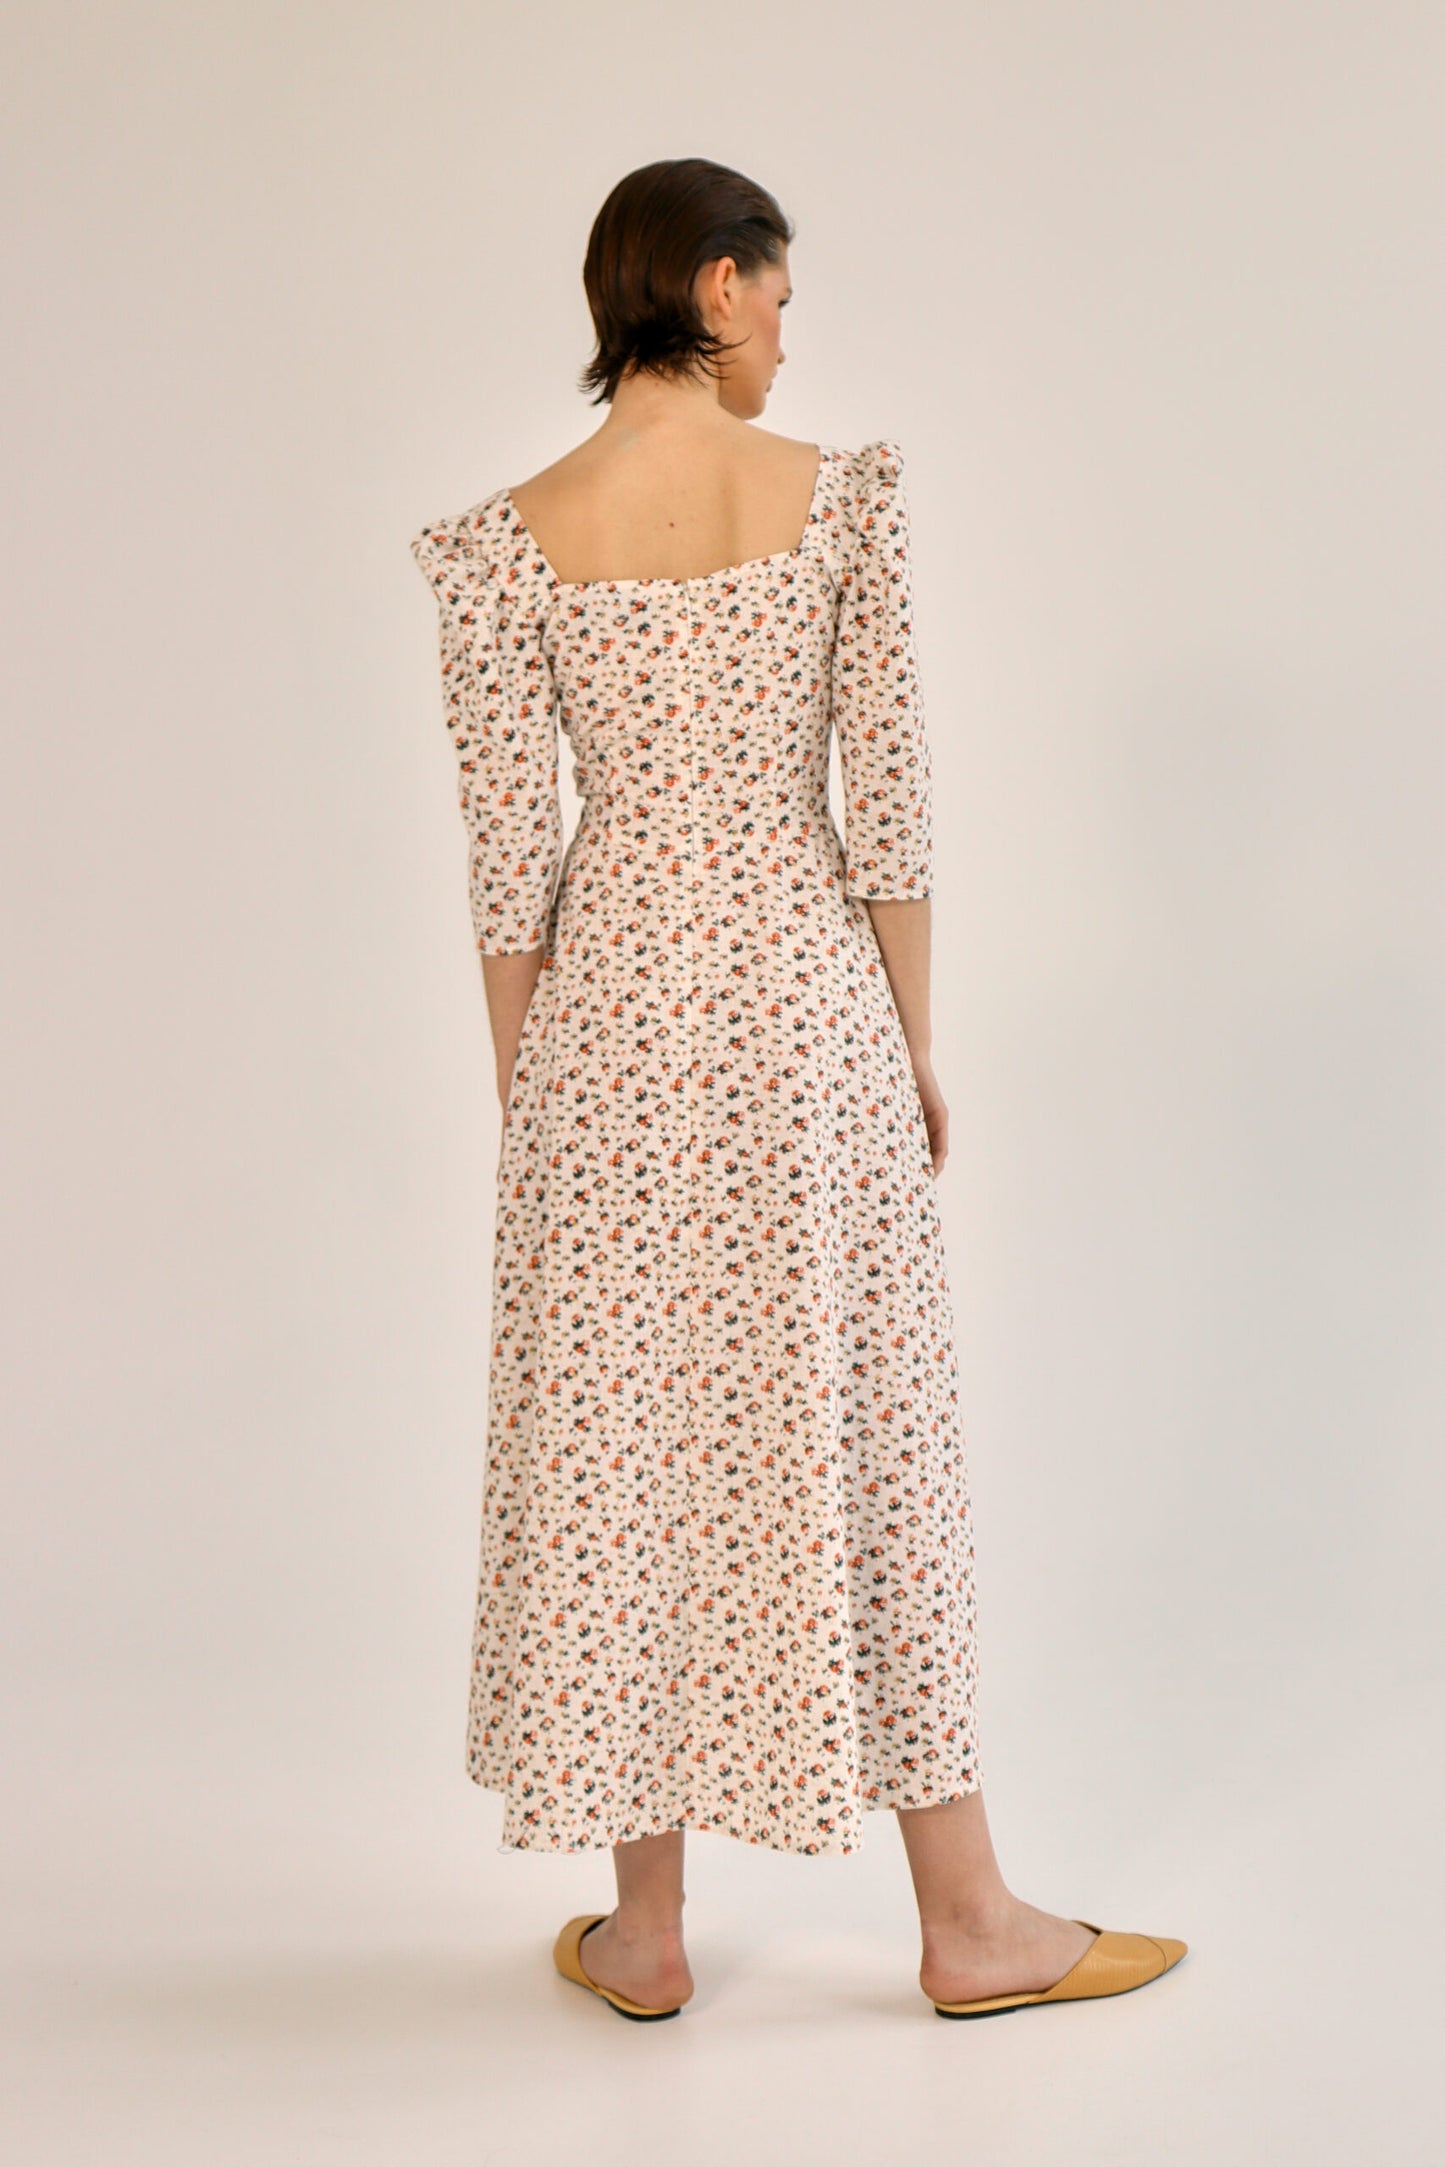 Linen dress with  a floral print